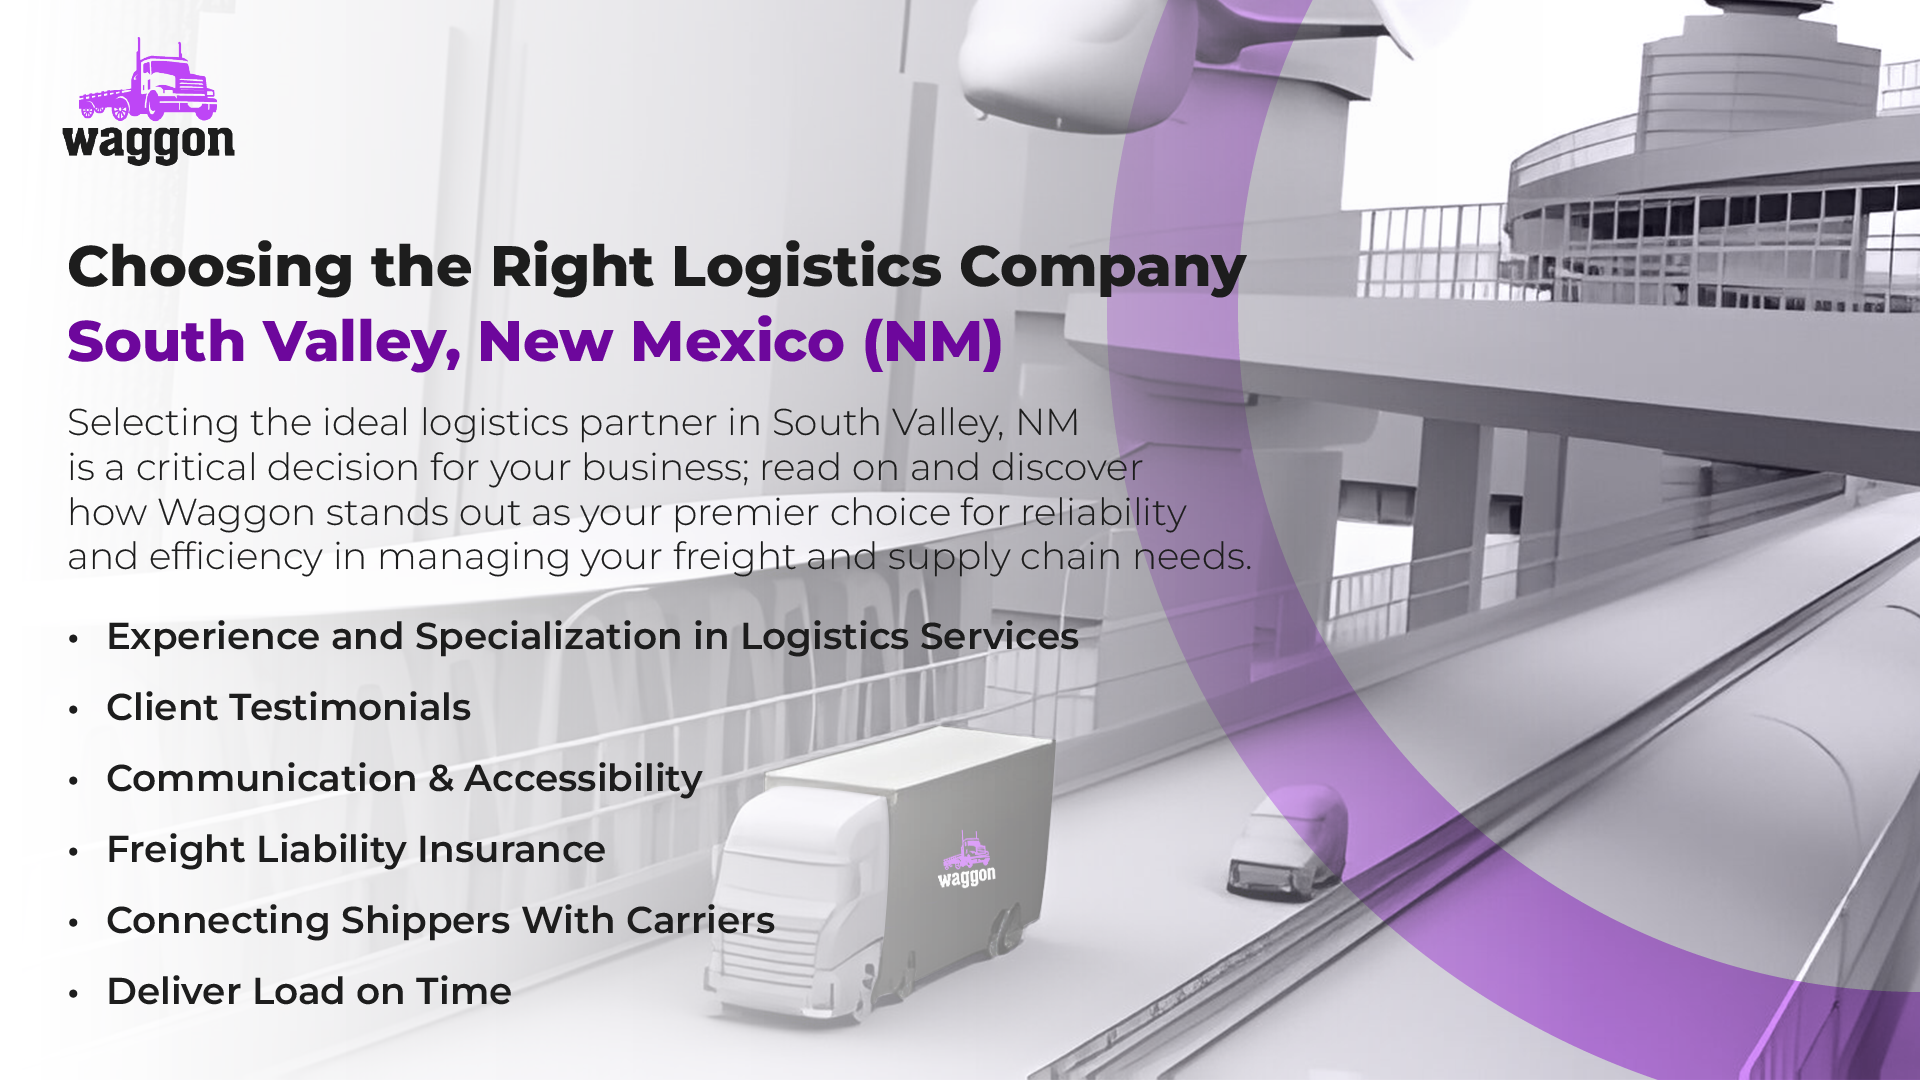 Choosing the Right Logistics Company in South Valley, New Mexico (NM)